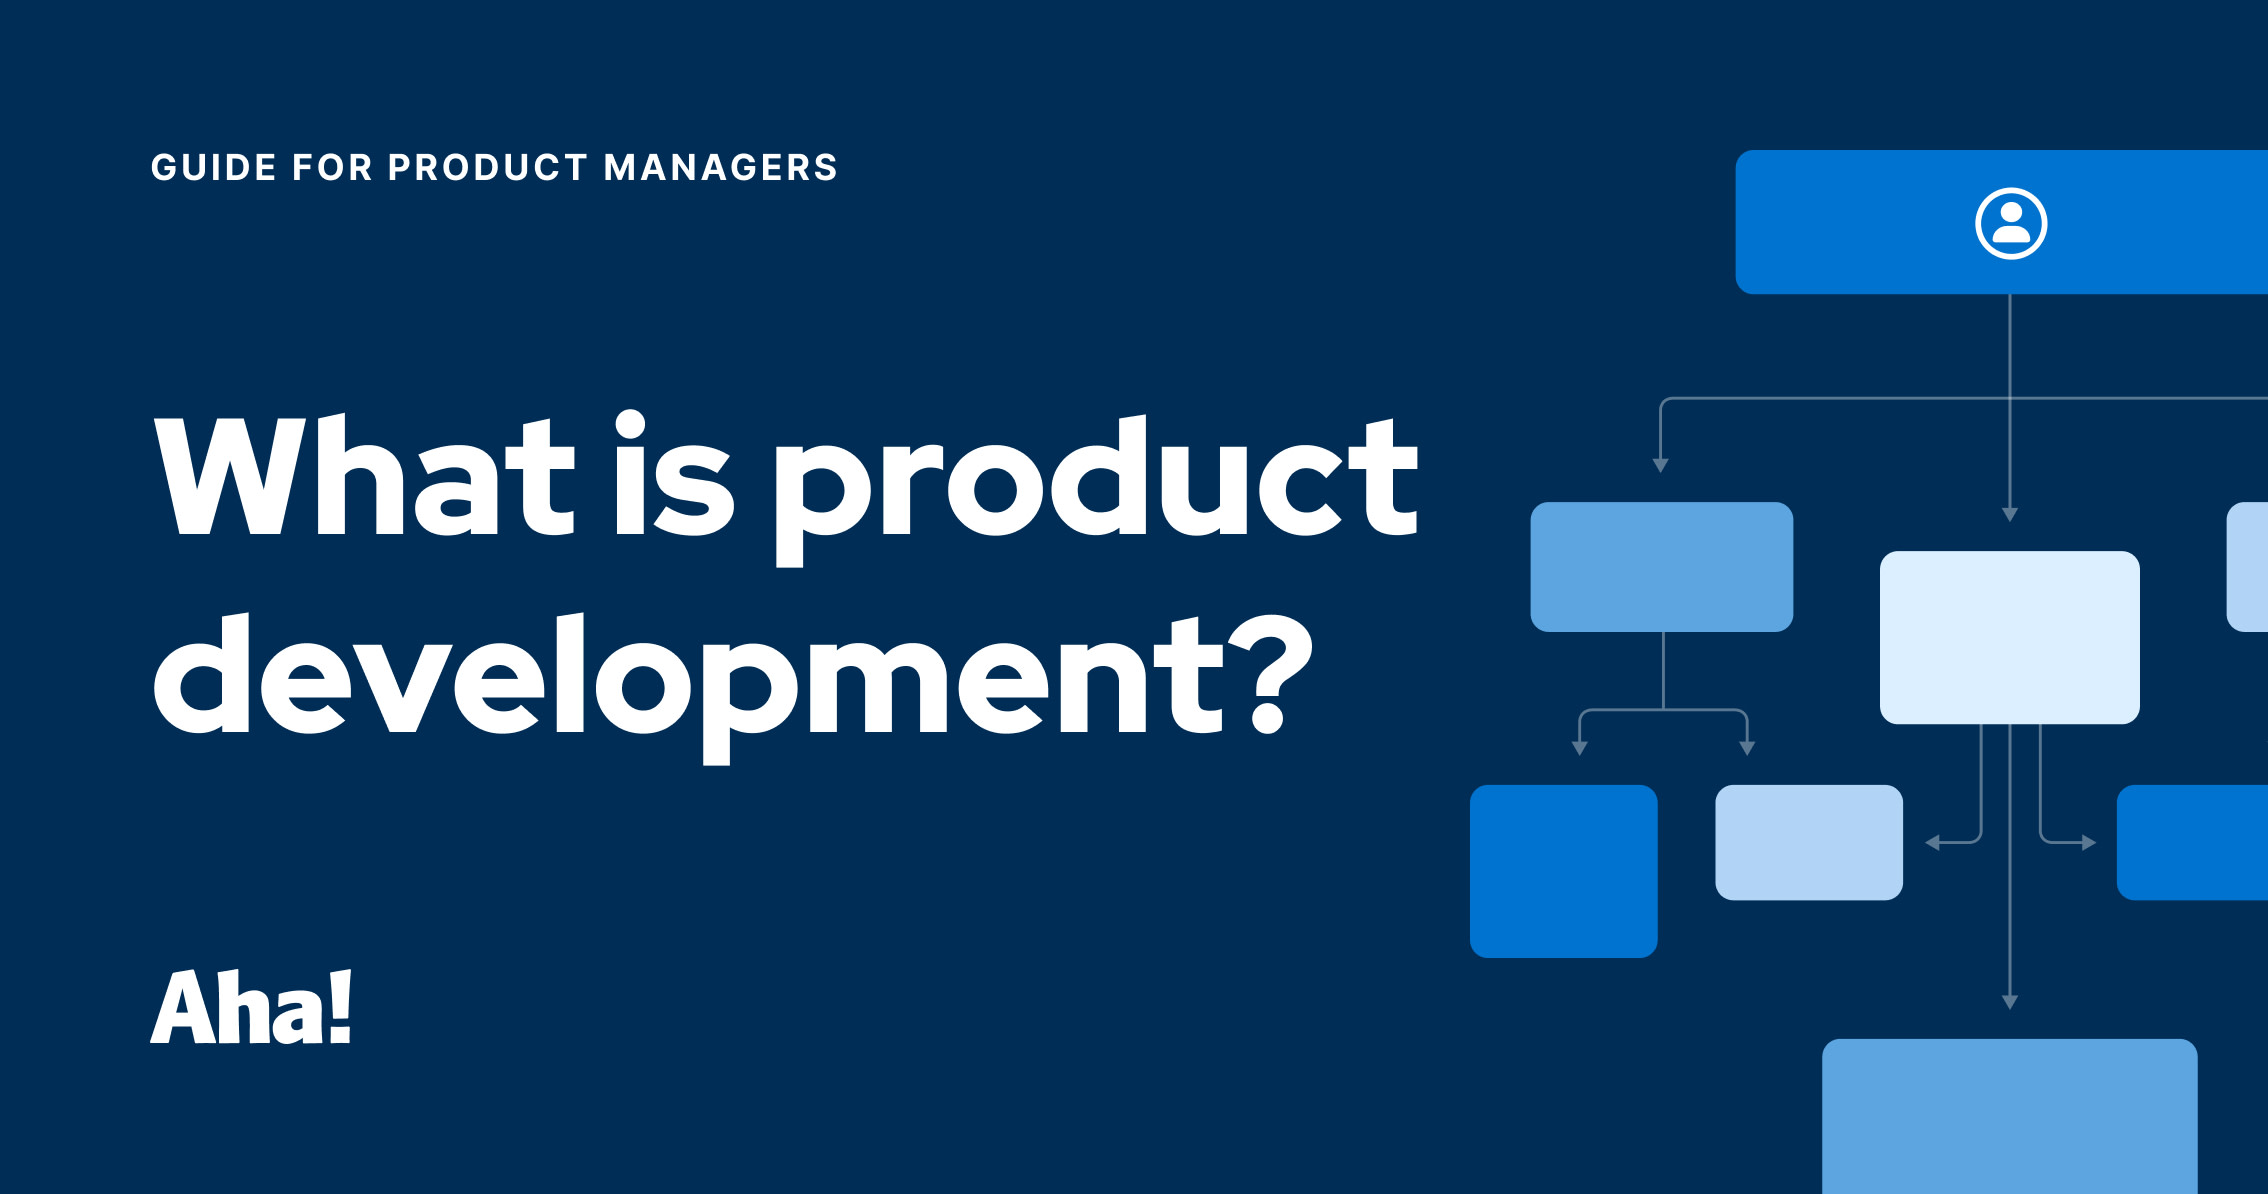 What Is Product Development? Guide for Product Managers